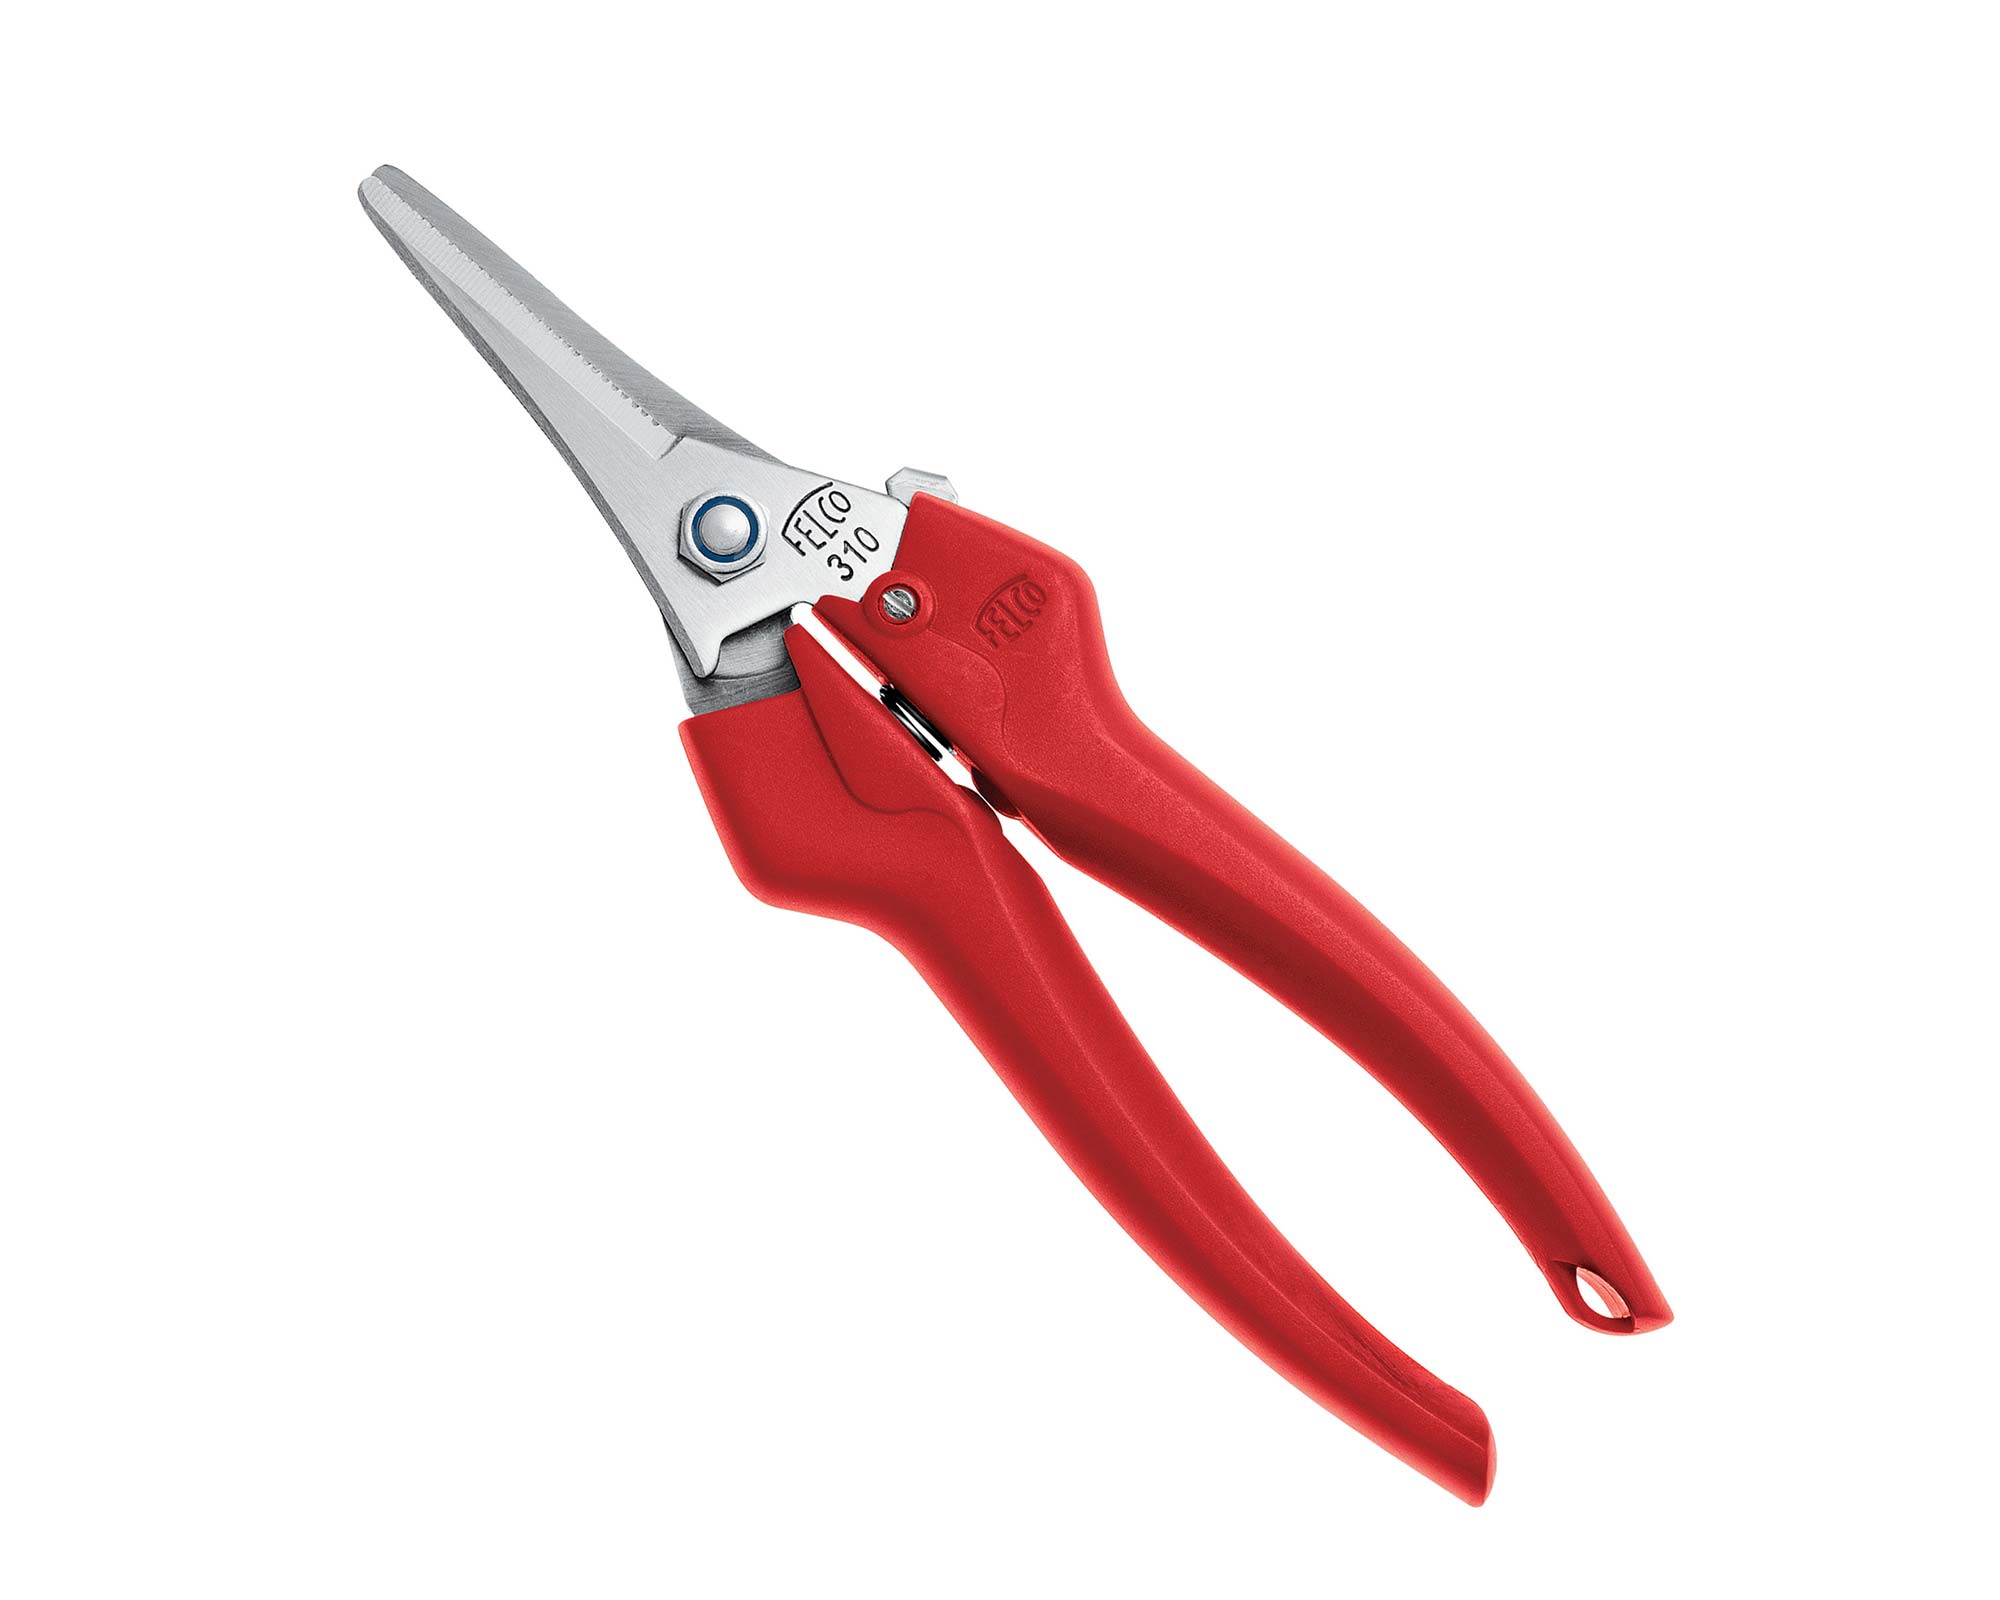 Felco 310 pick and trim snips, ideal for fruit, flower and veg picking.